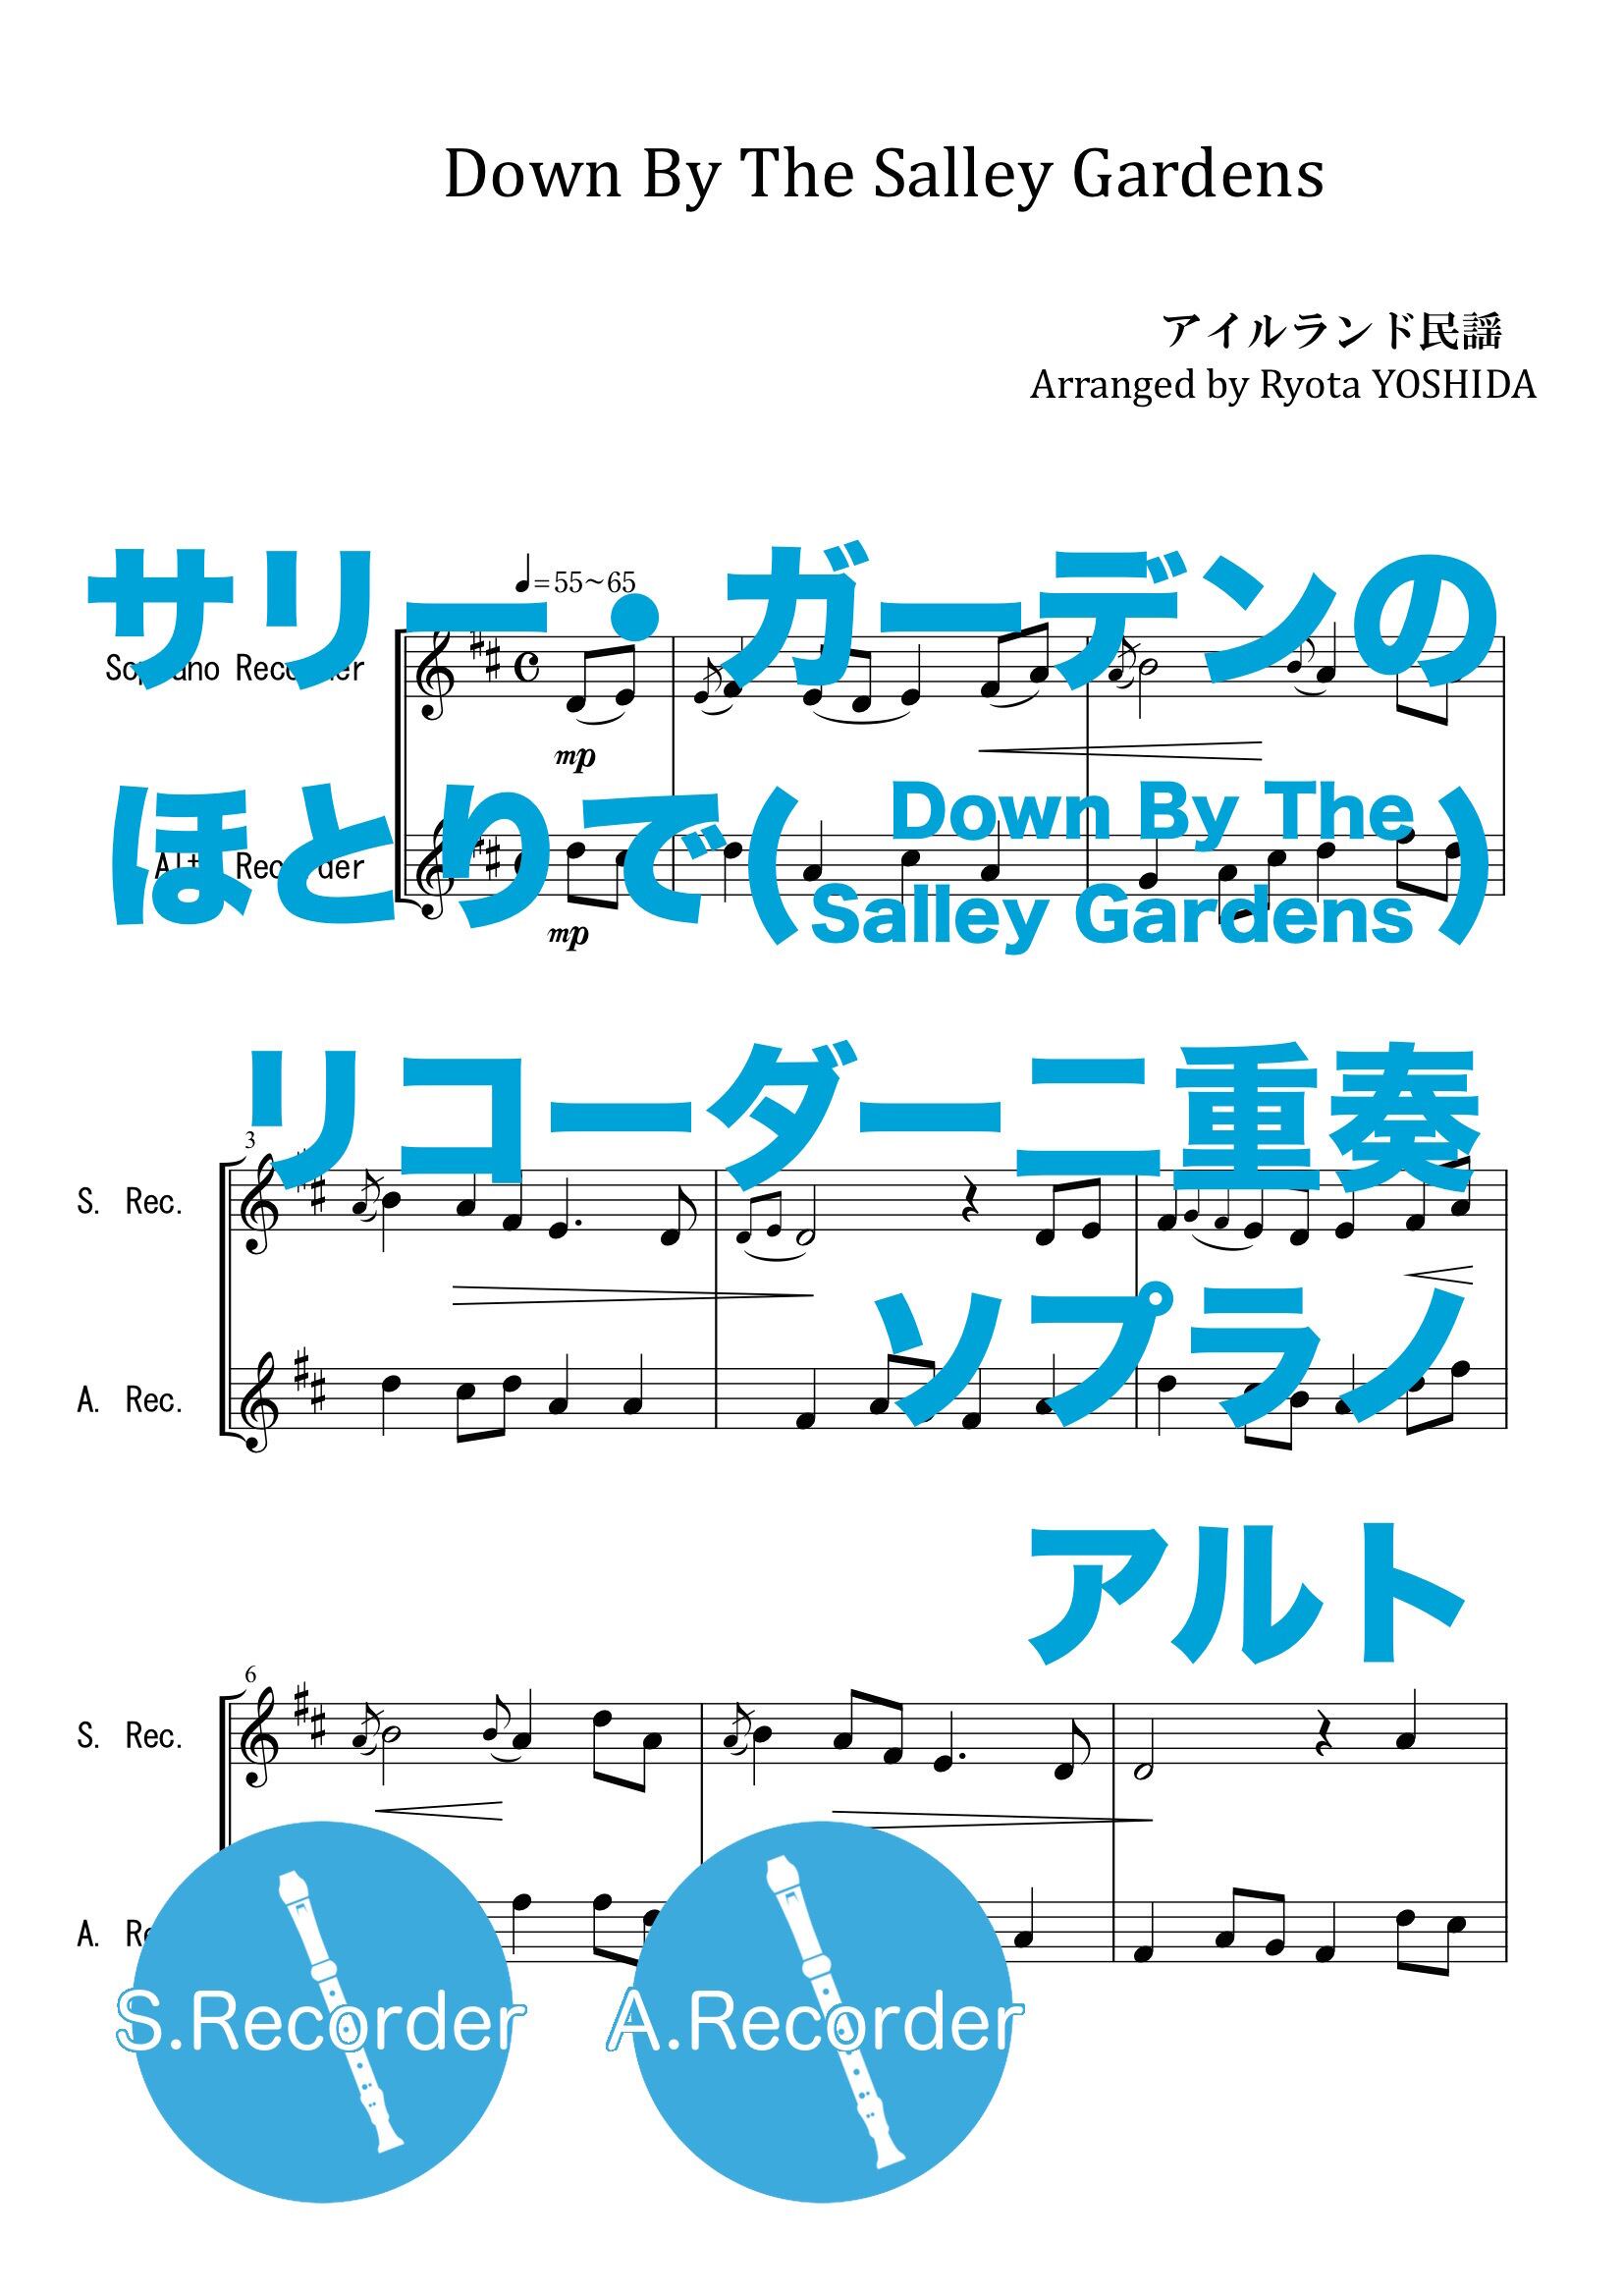 Down By The Salley Gardens リコーダー二重奏 | Rs Music Sheets Shop